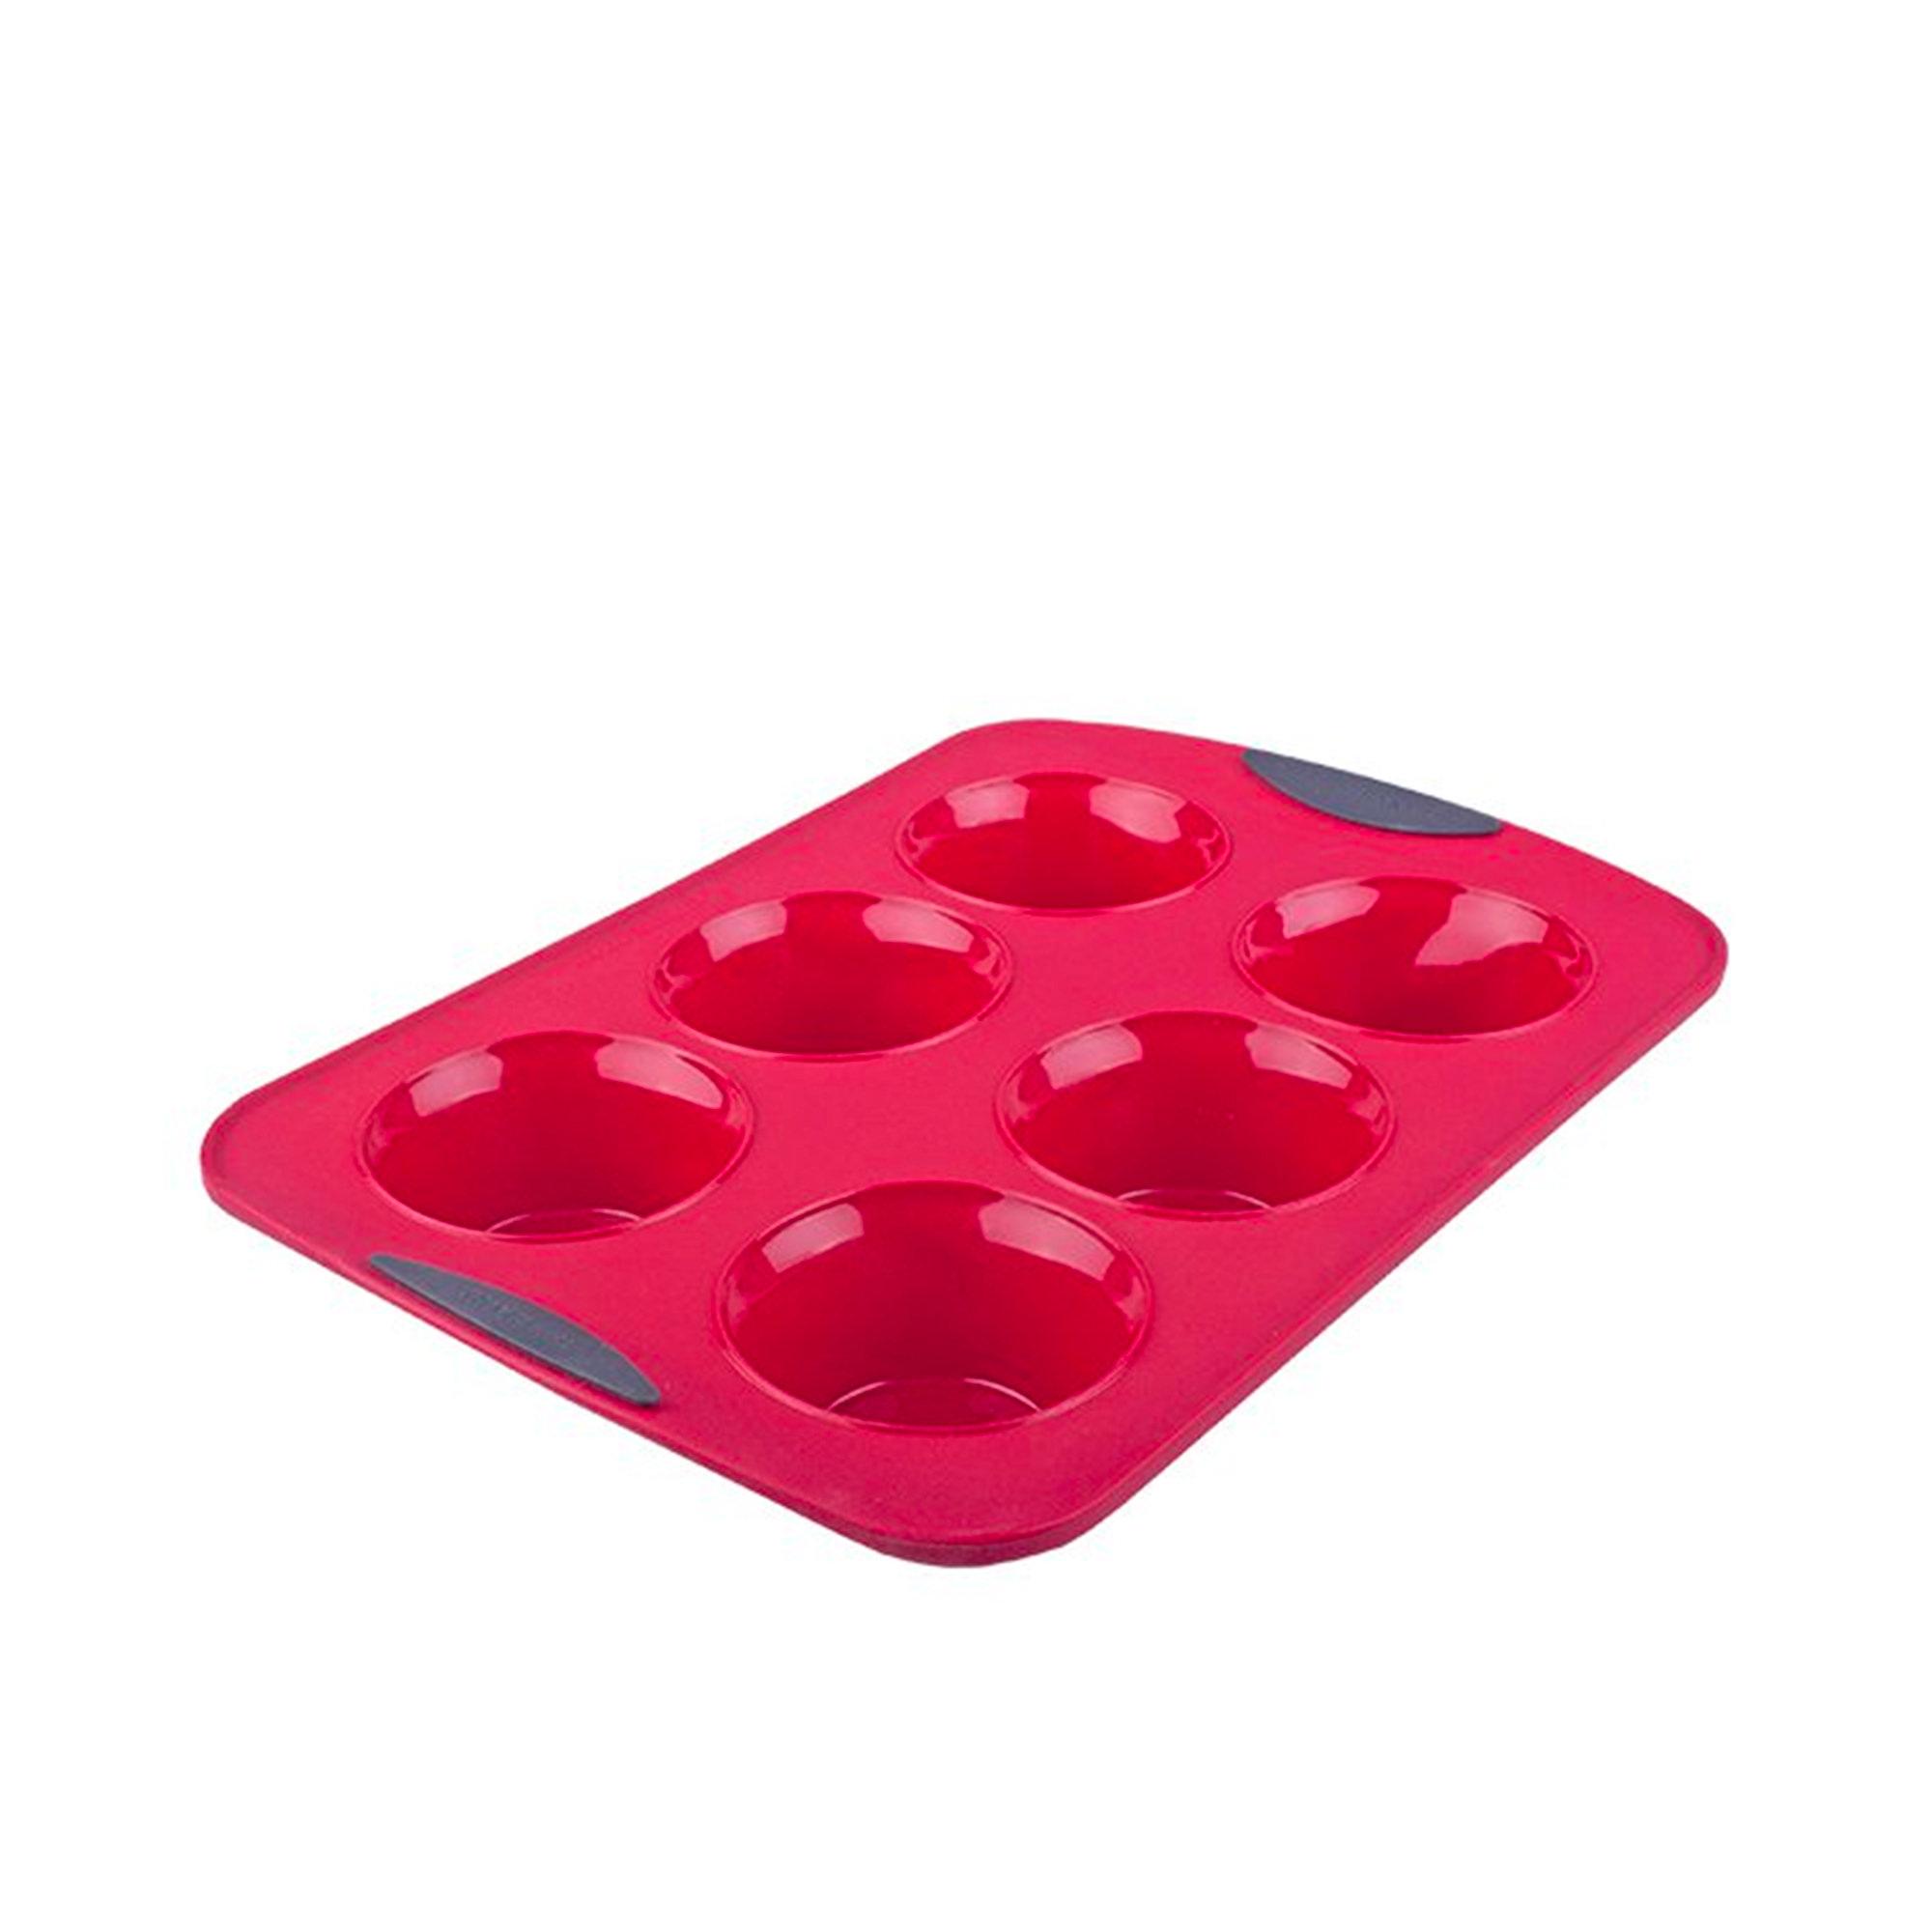 Daily Bake Silicone Jumbo Muffin Pan 6 Cup Red Image 1